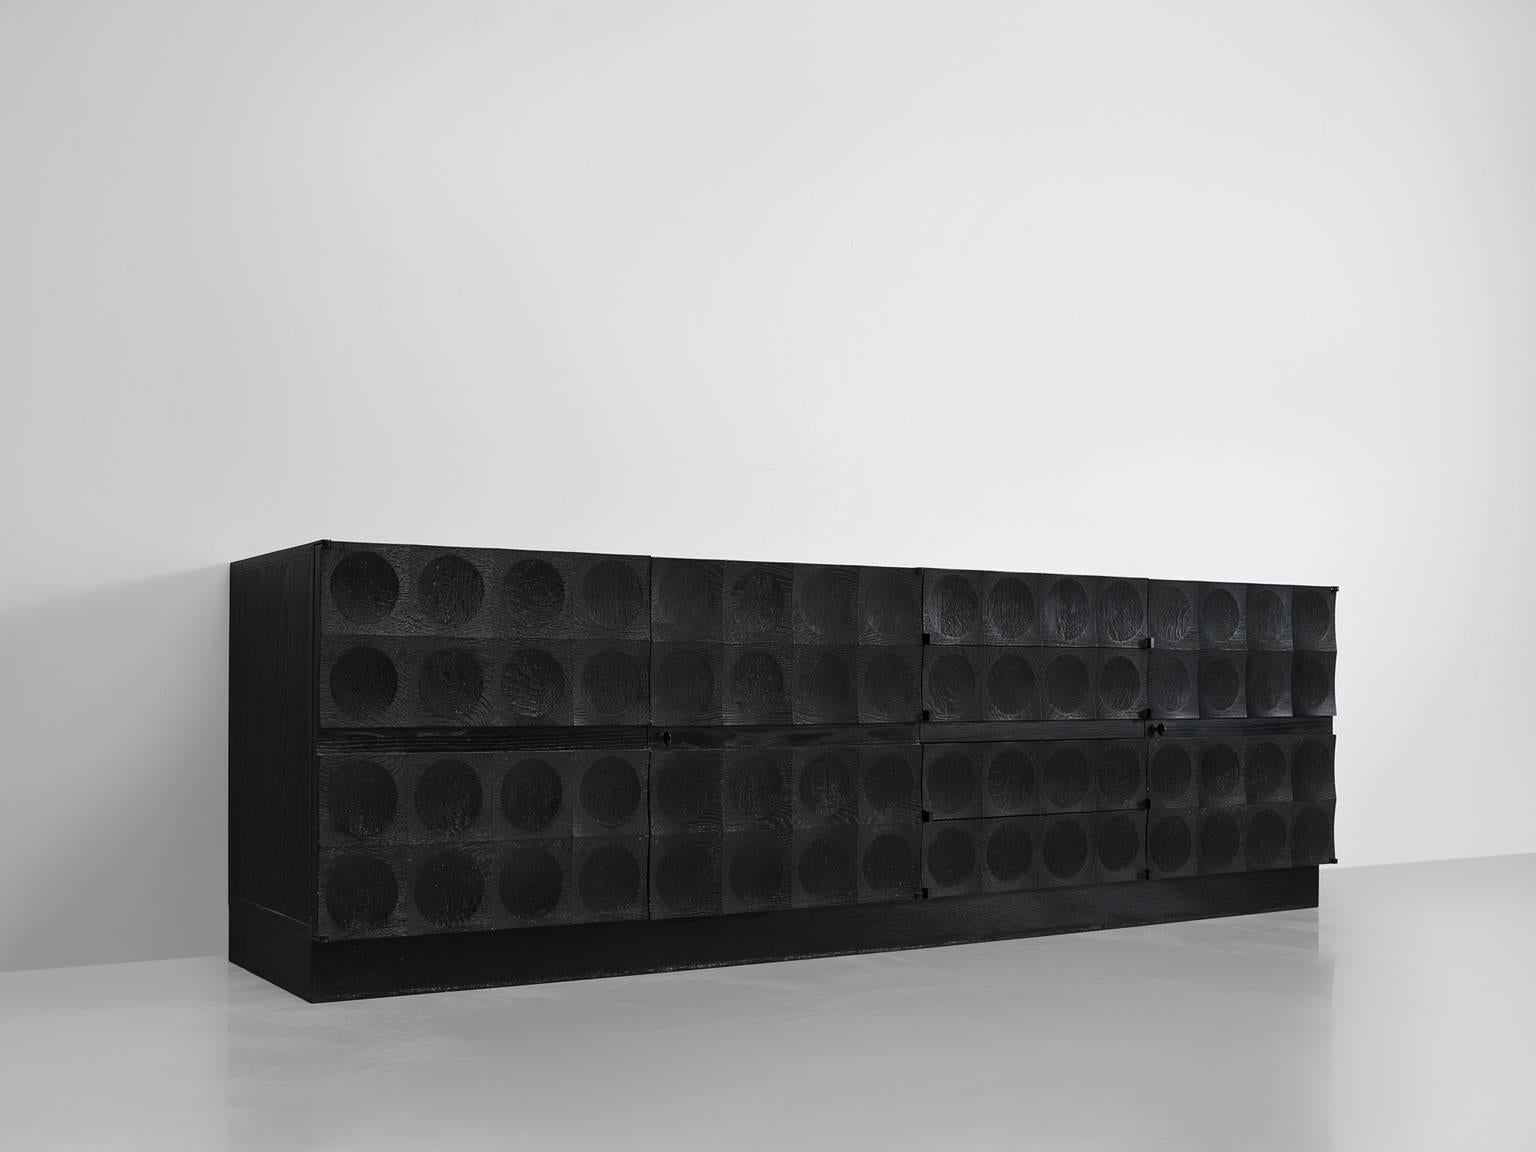 De Coene, credenza in ebonized oak, Belgium, 1970s. 

This large graphical stained black sideboard in oak is designed by De Coene Frères. This Brutalist credenza shows a beautiful graphical front. Each of the doors is ribbed and decorated with